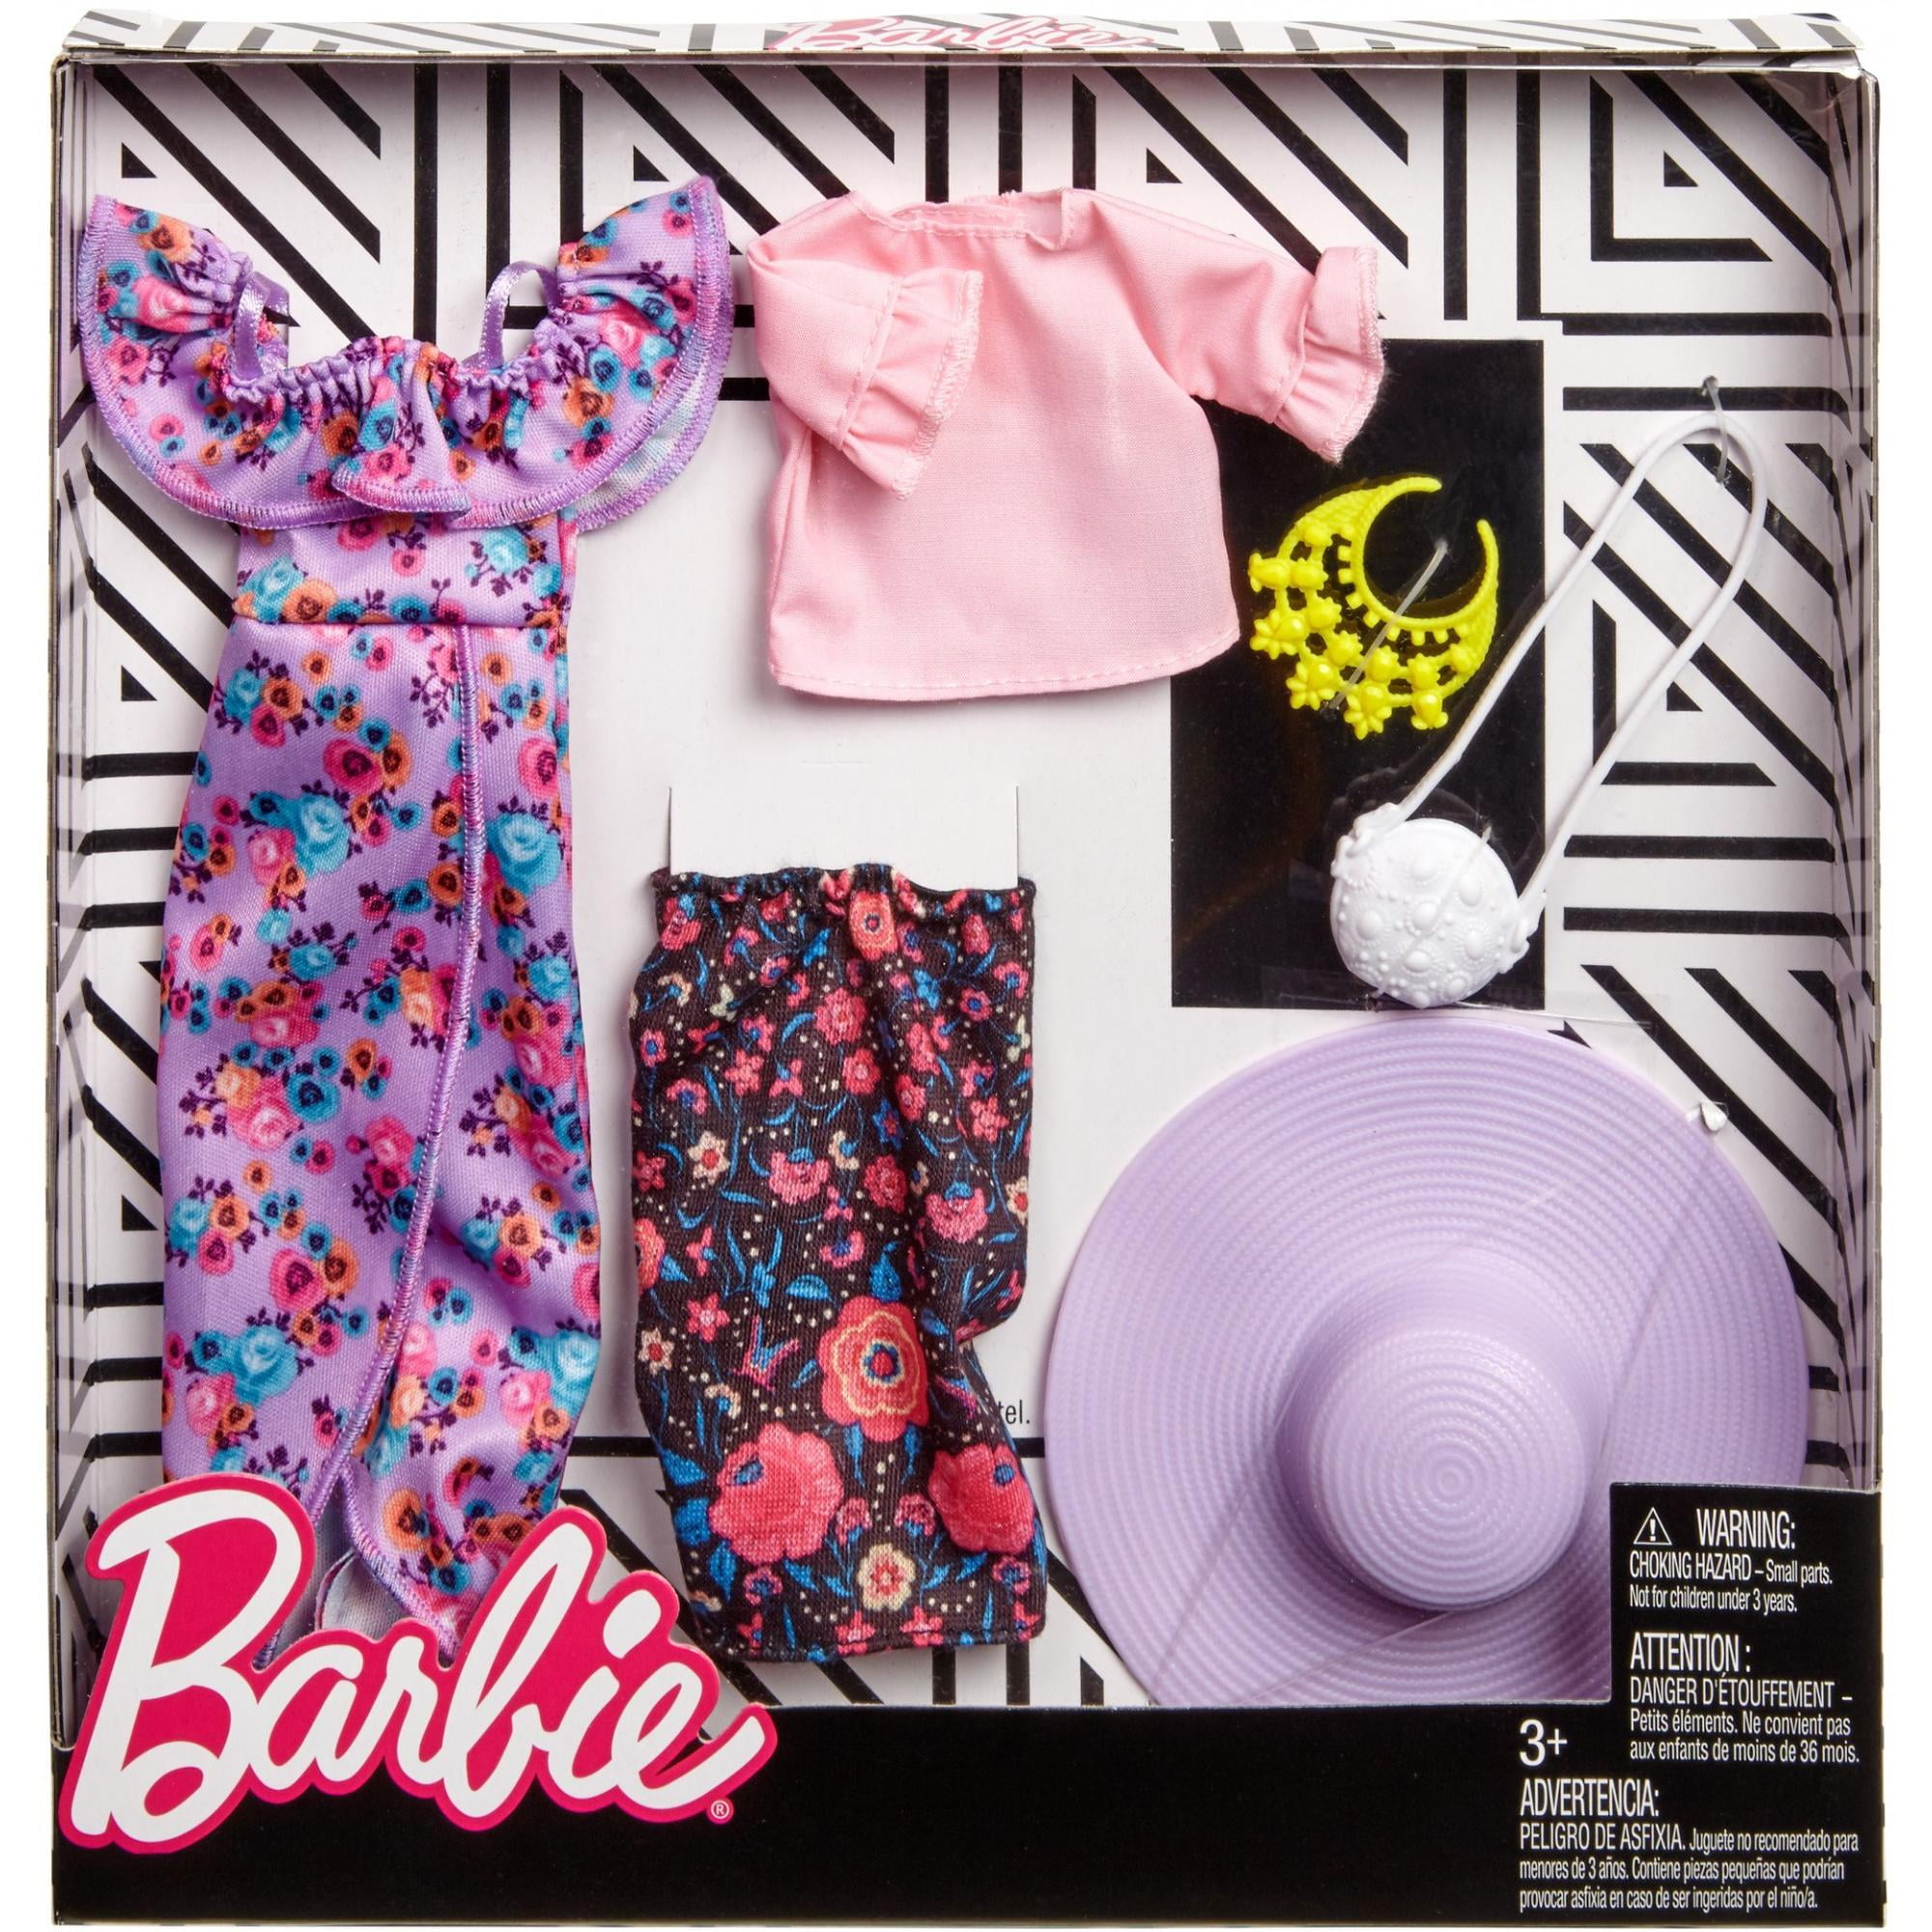 Details about   Hello Kitty Barbie Clothes Fashion Pack Complete Outfit Gray Top & Pink Skirt 